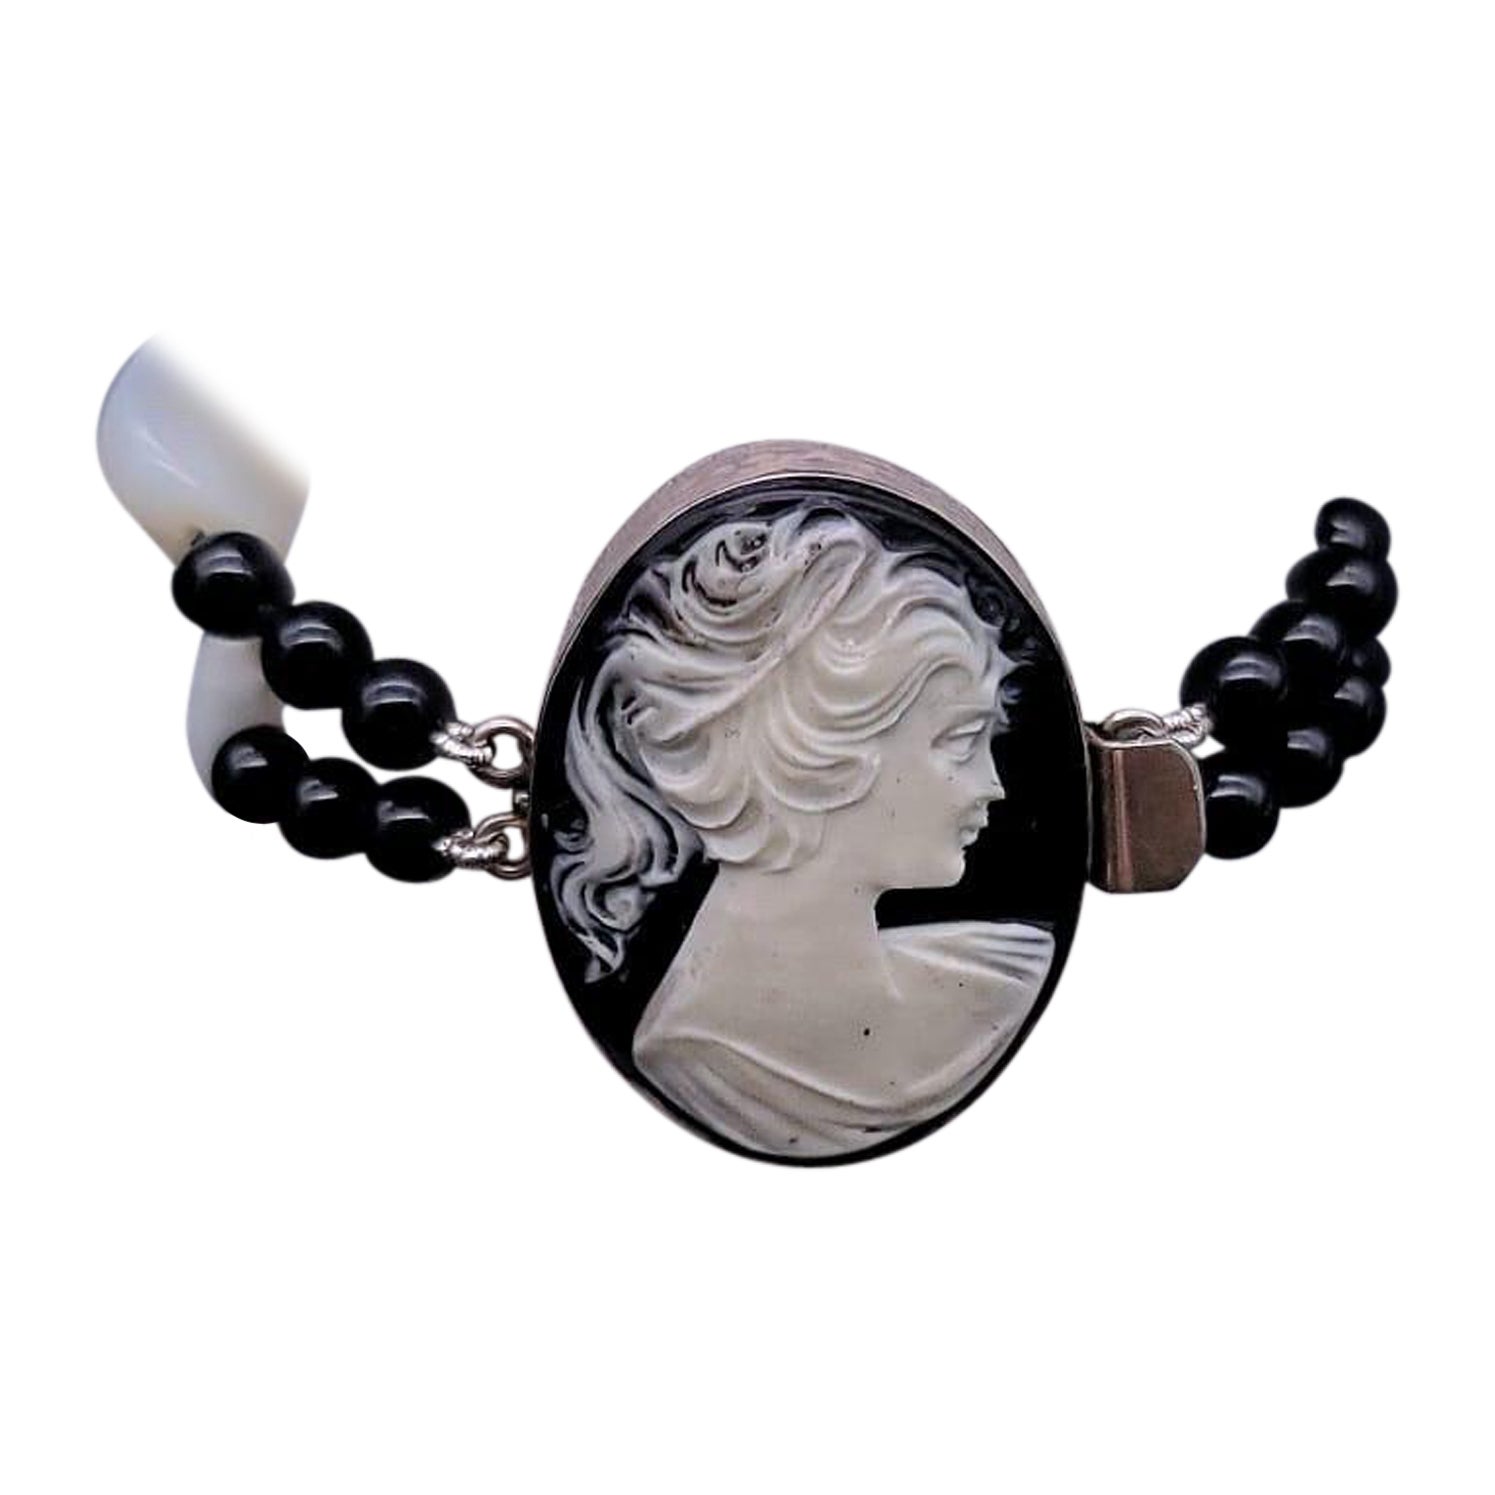 One-of-a-Kind
Make a statement with this stunning black and white bracelet. Featuring a mix of mother-of-pearl and polished Onyx beads, this bracelet is truly unique. The strong carved onyx cameo adds a powerful touch to the design, mounted in a